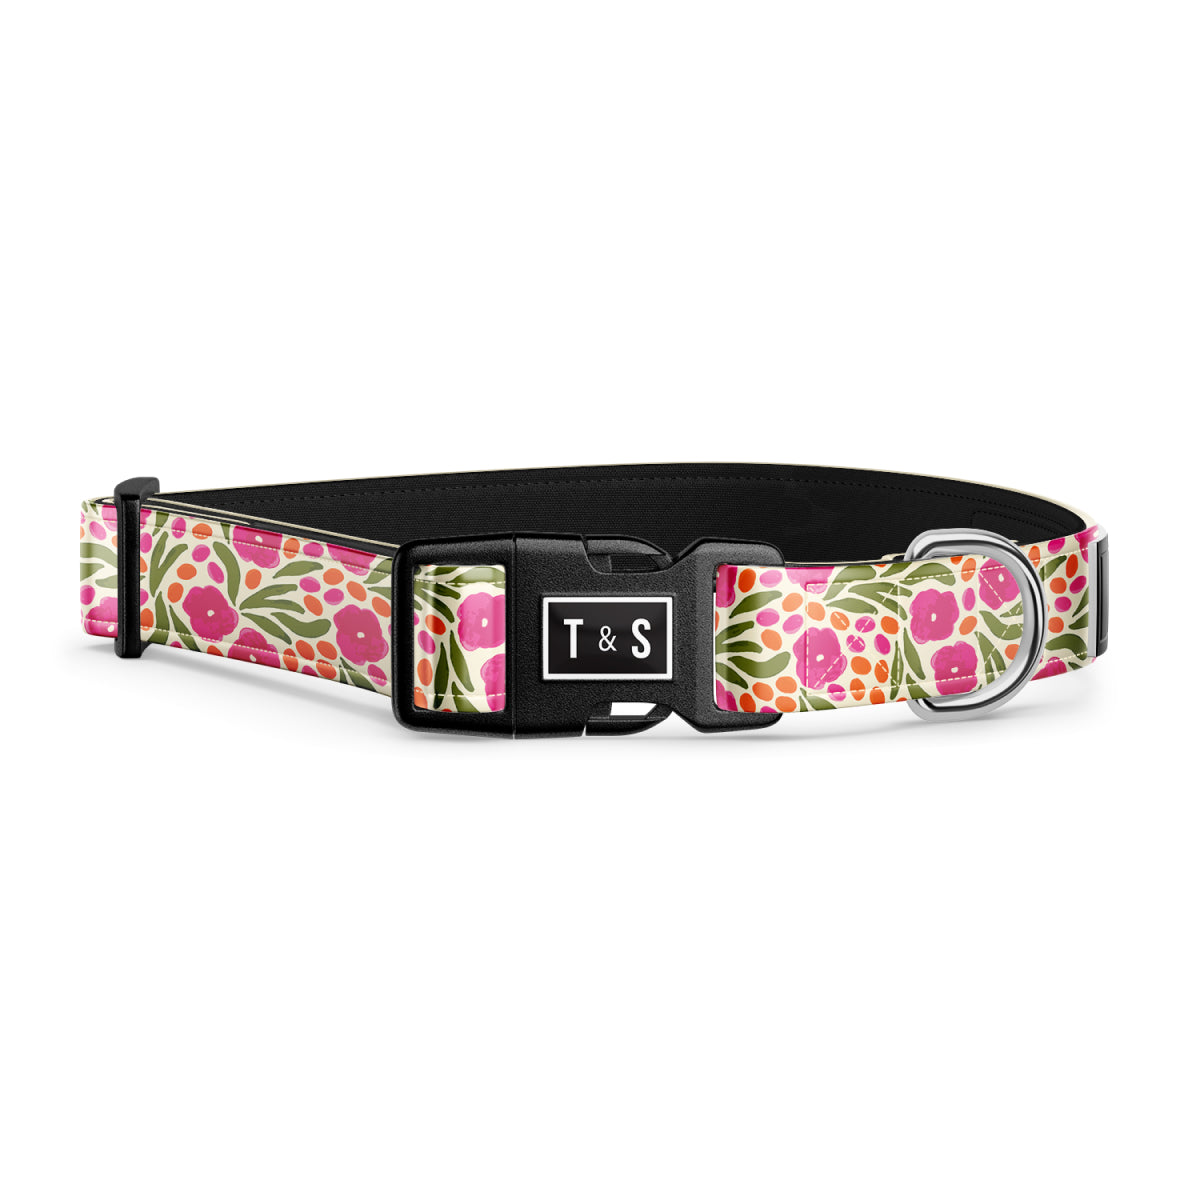 London's Flowers Combo Collar and Leash